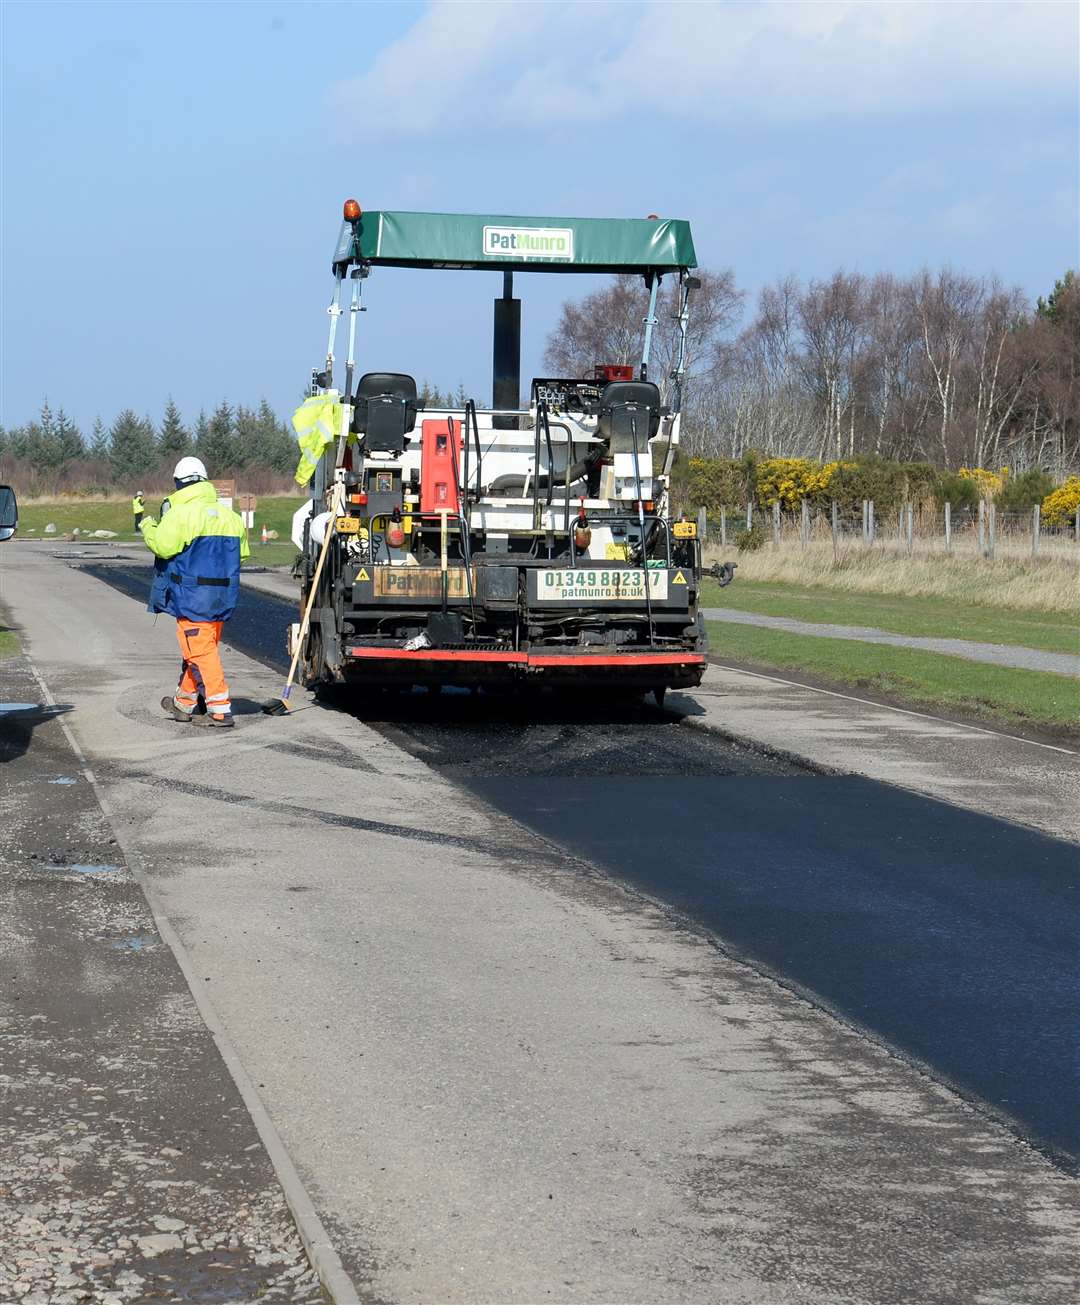 Resurfacing work on access road to Culloden Battlefield,diversion in place...Picture: Gary Anthony. Image No..